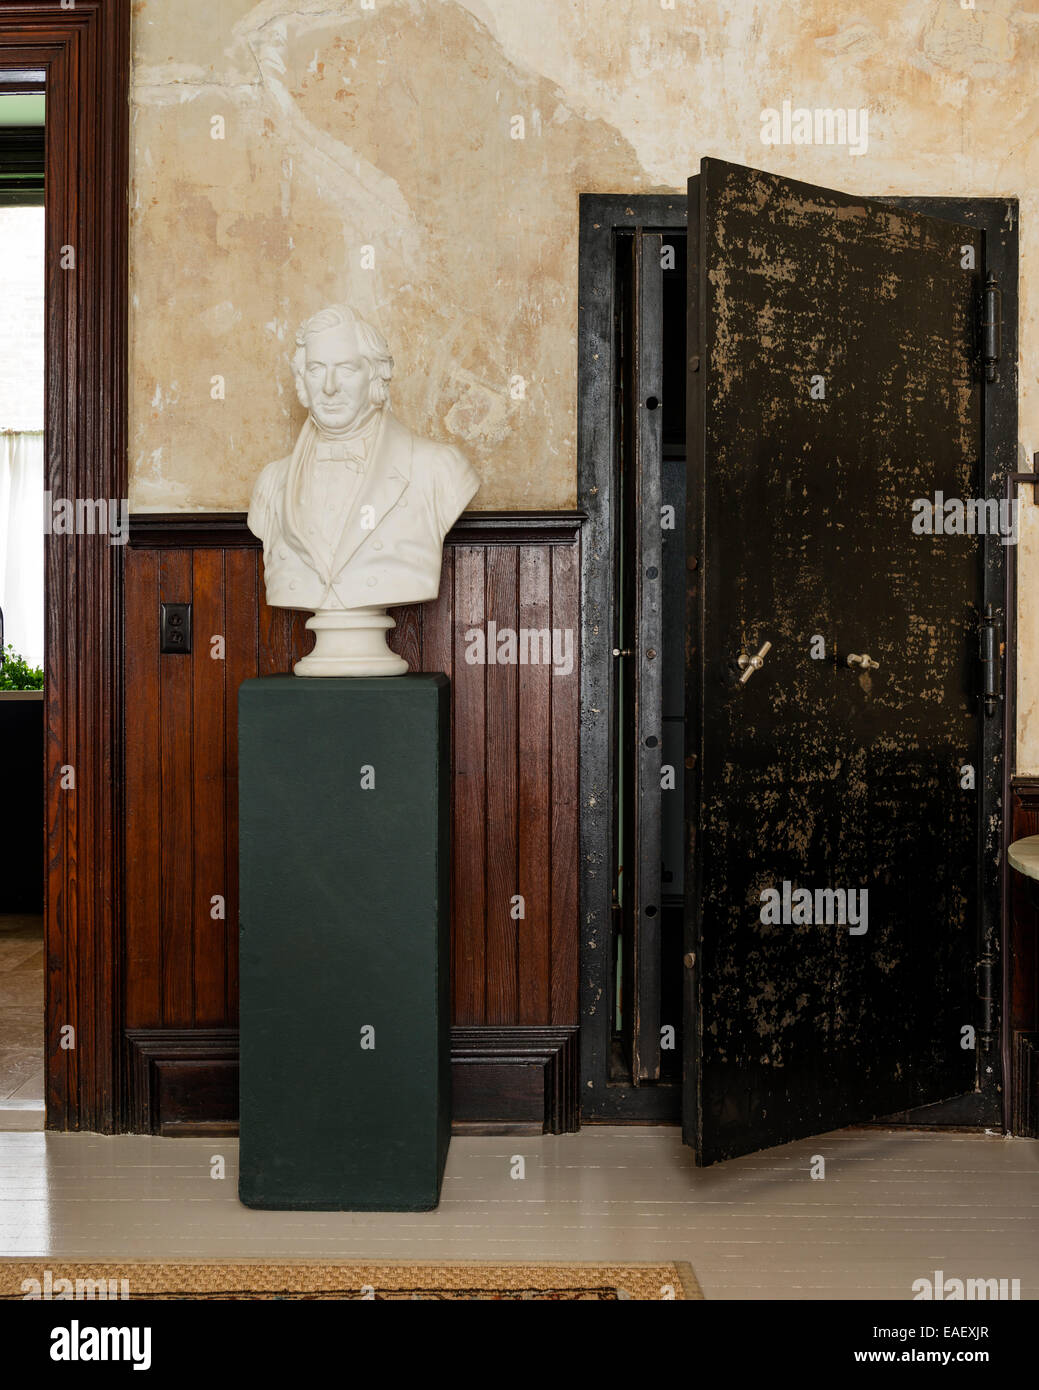 Plaster bust on green plinth in room with wooden wall panelling and large walk-in safe Stock Photo